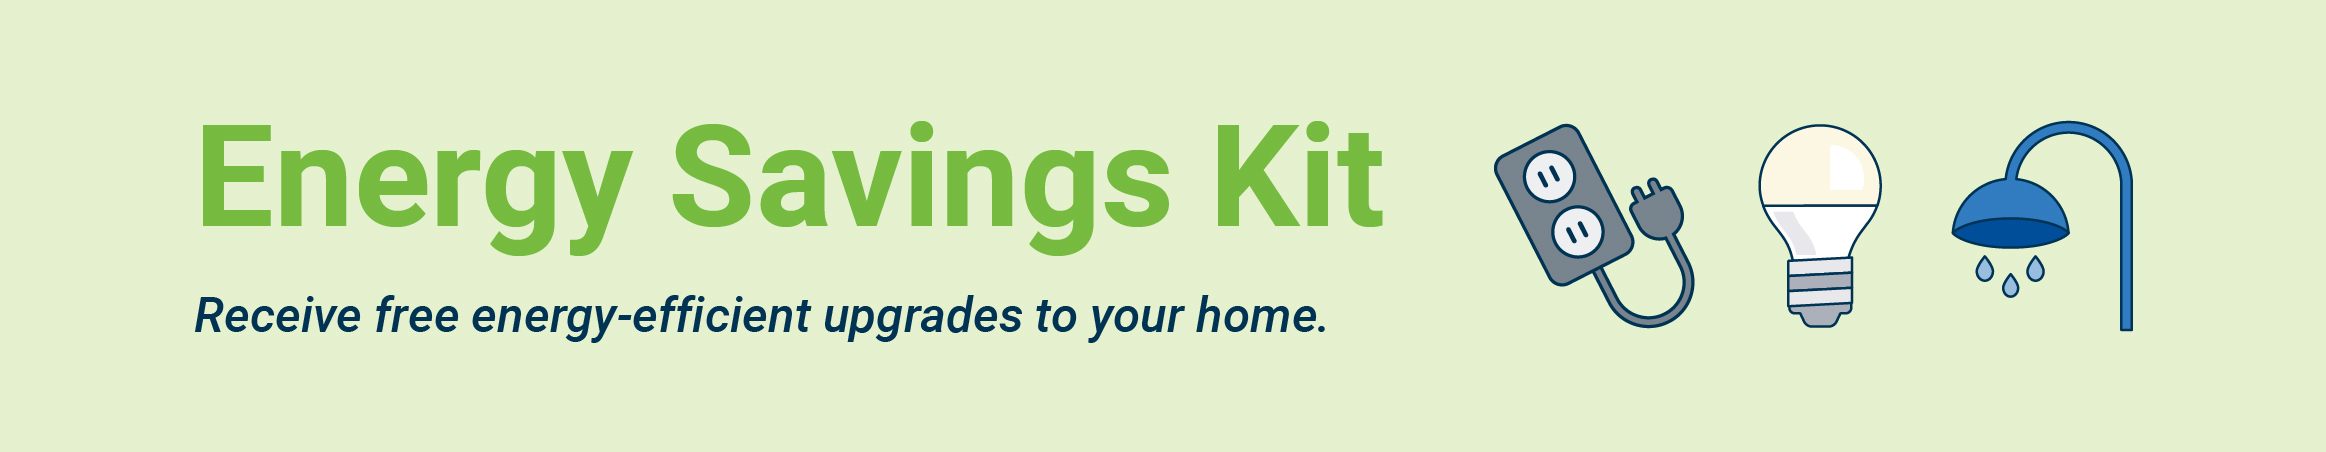 Energy Savings Kit - receive free energy-efficient upgrades to your home